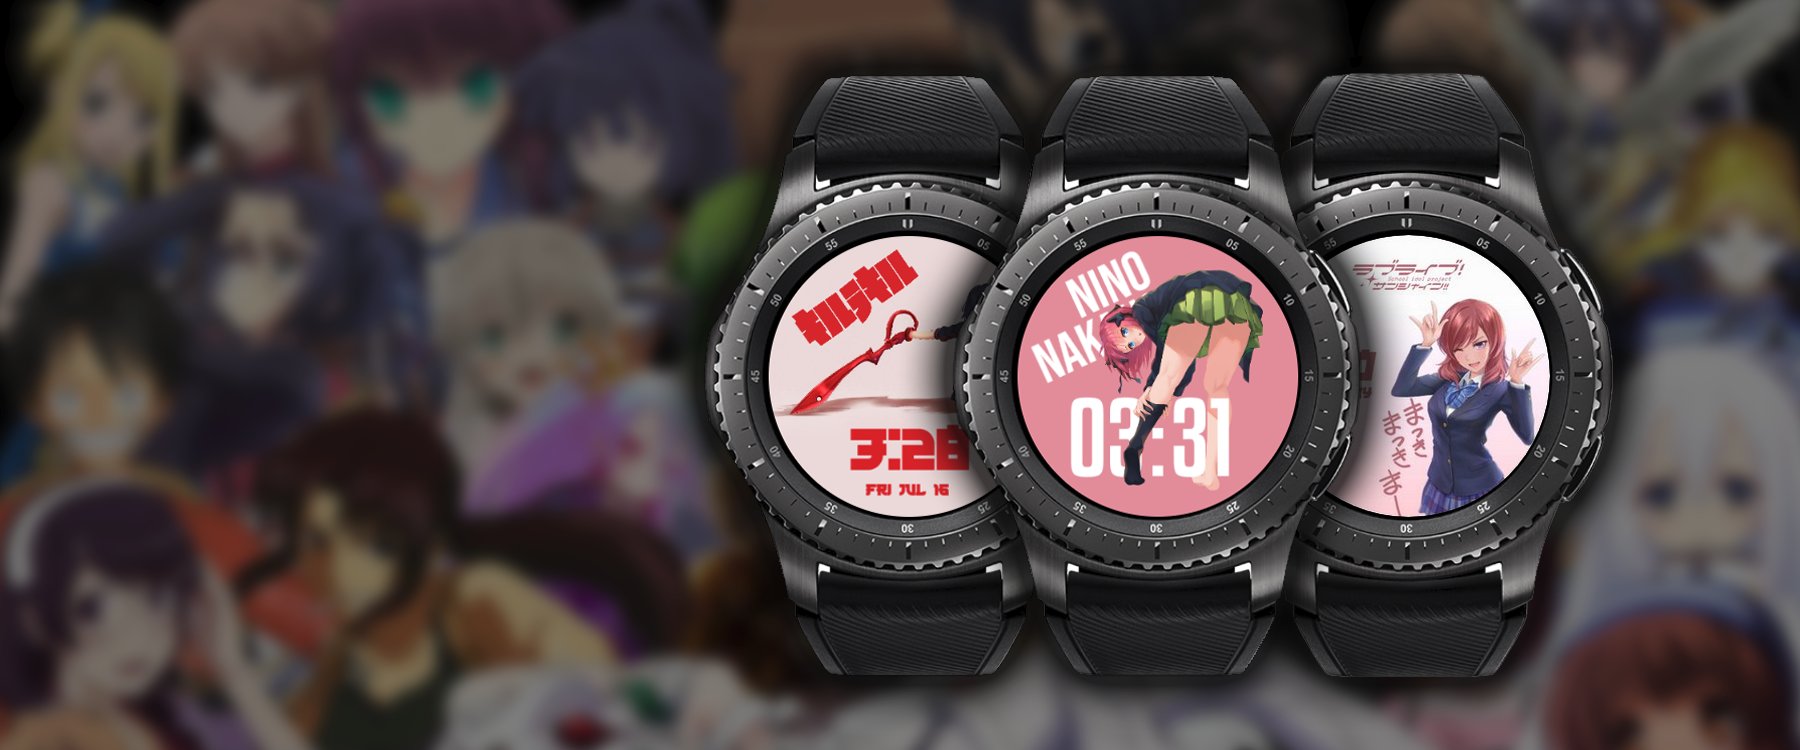 Top 10 anime watch face wallpaper ideas and inspiration